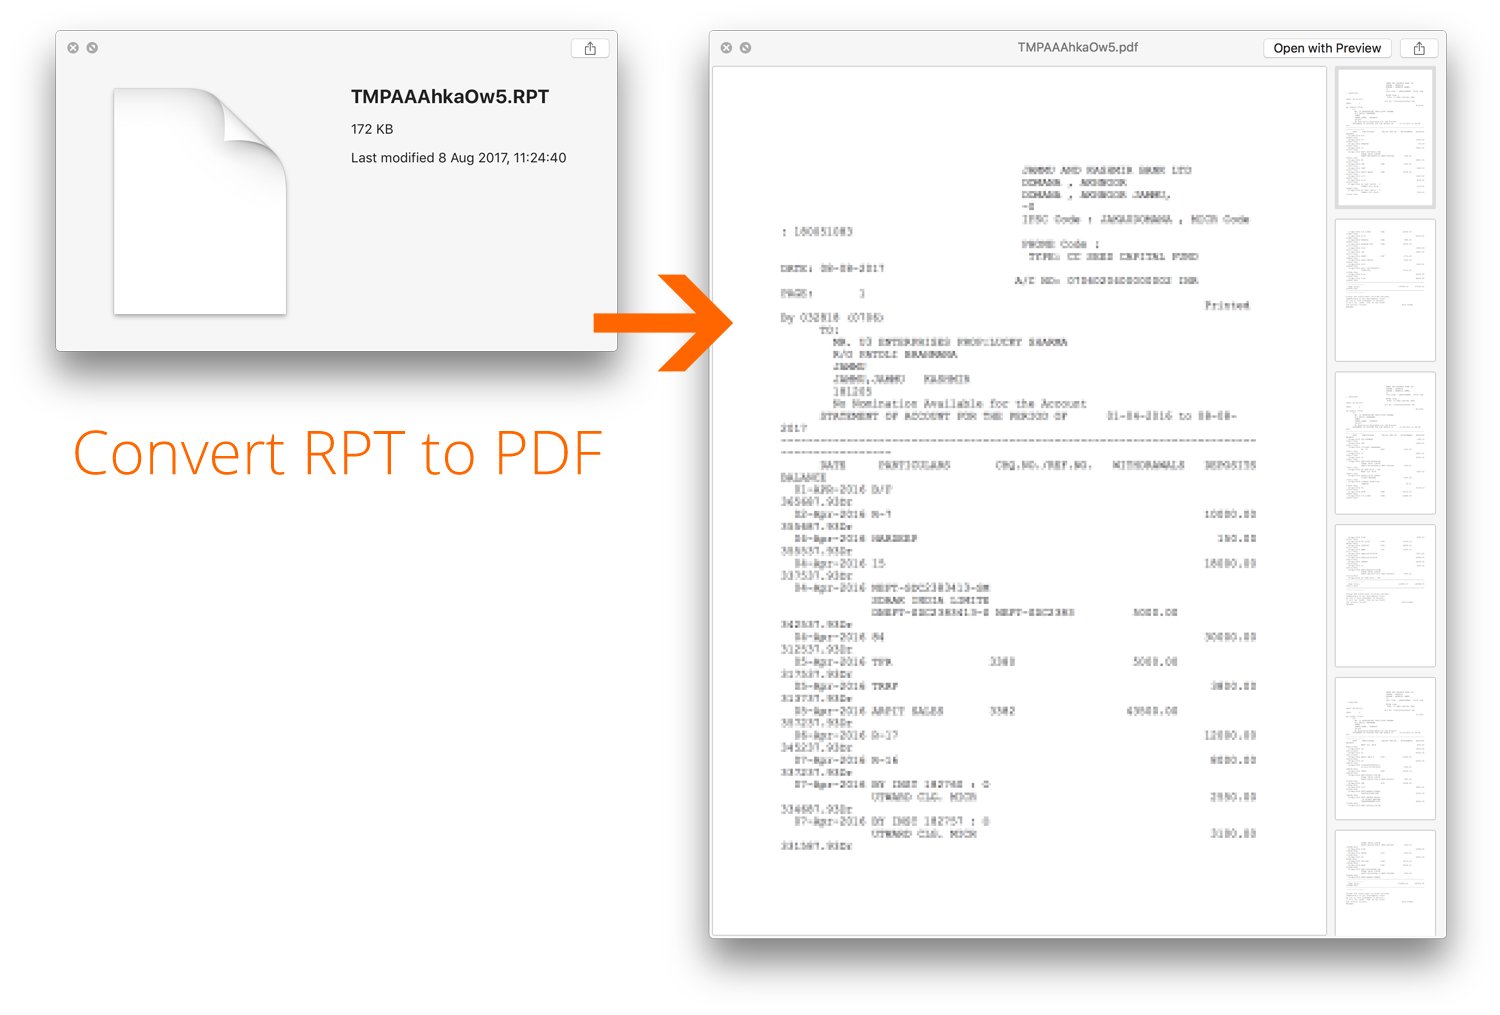 Rpt File Open software, free download